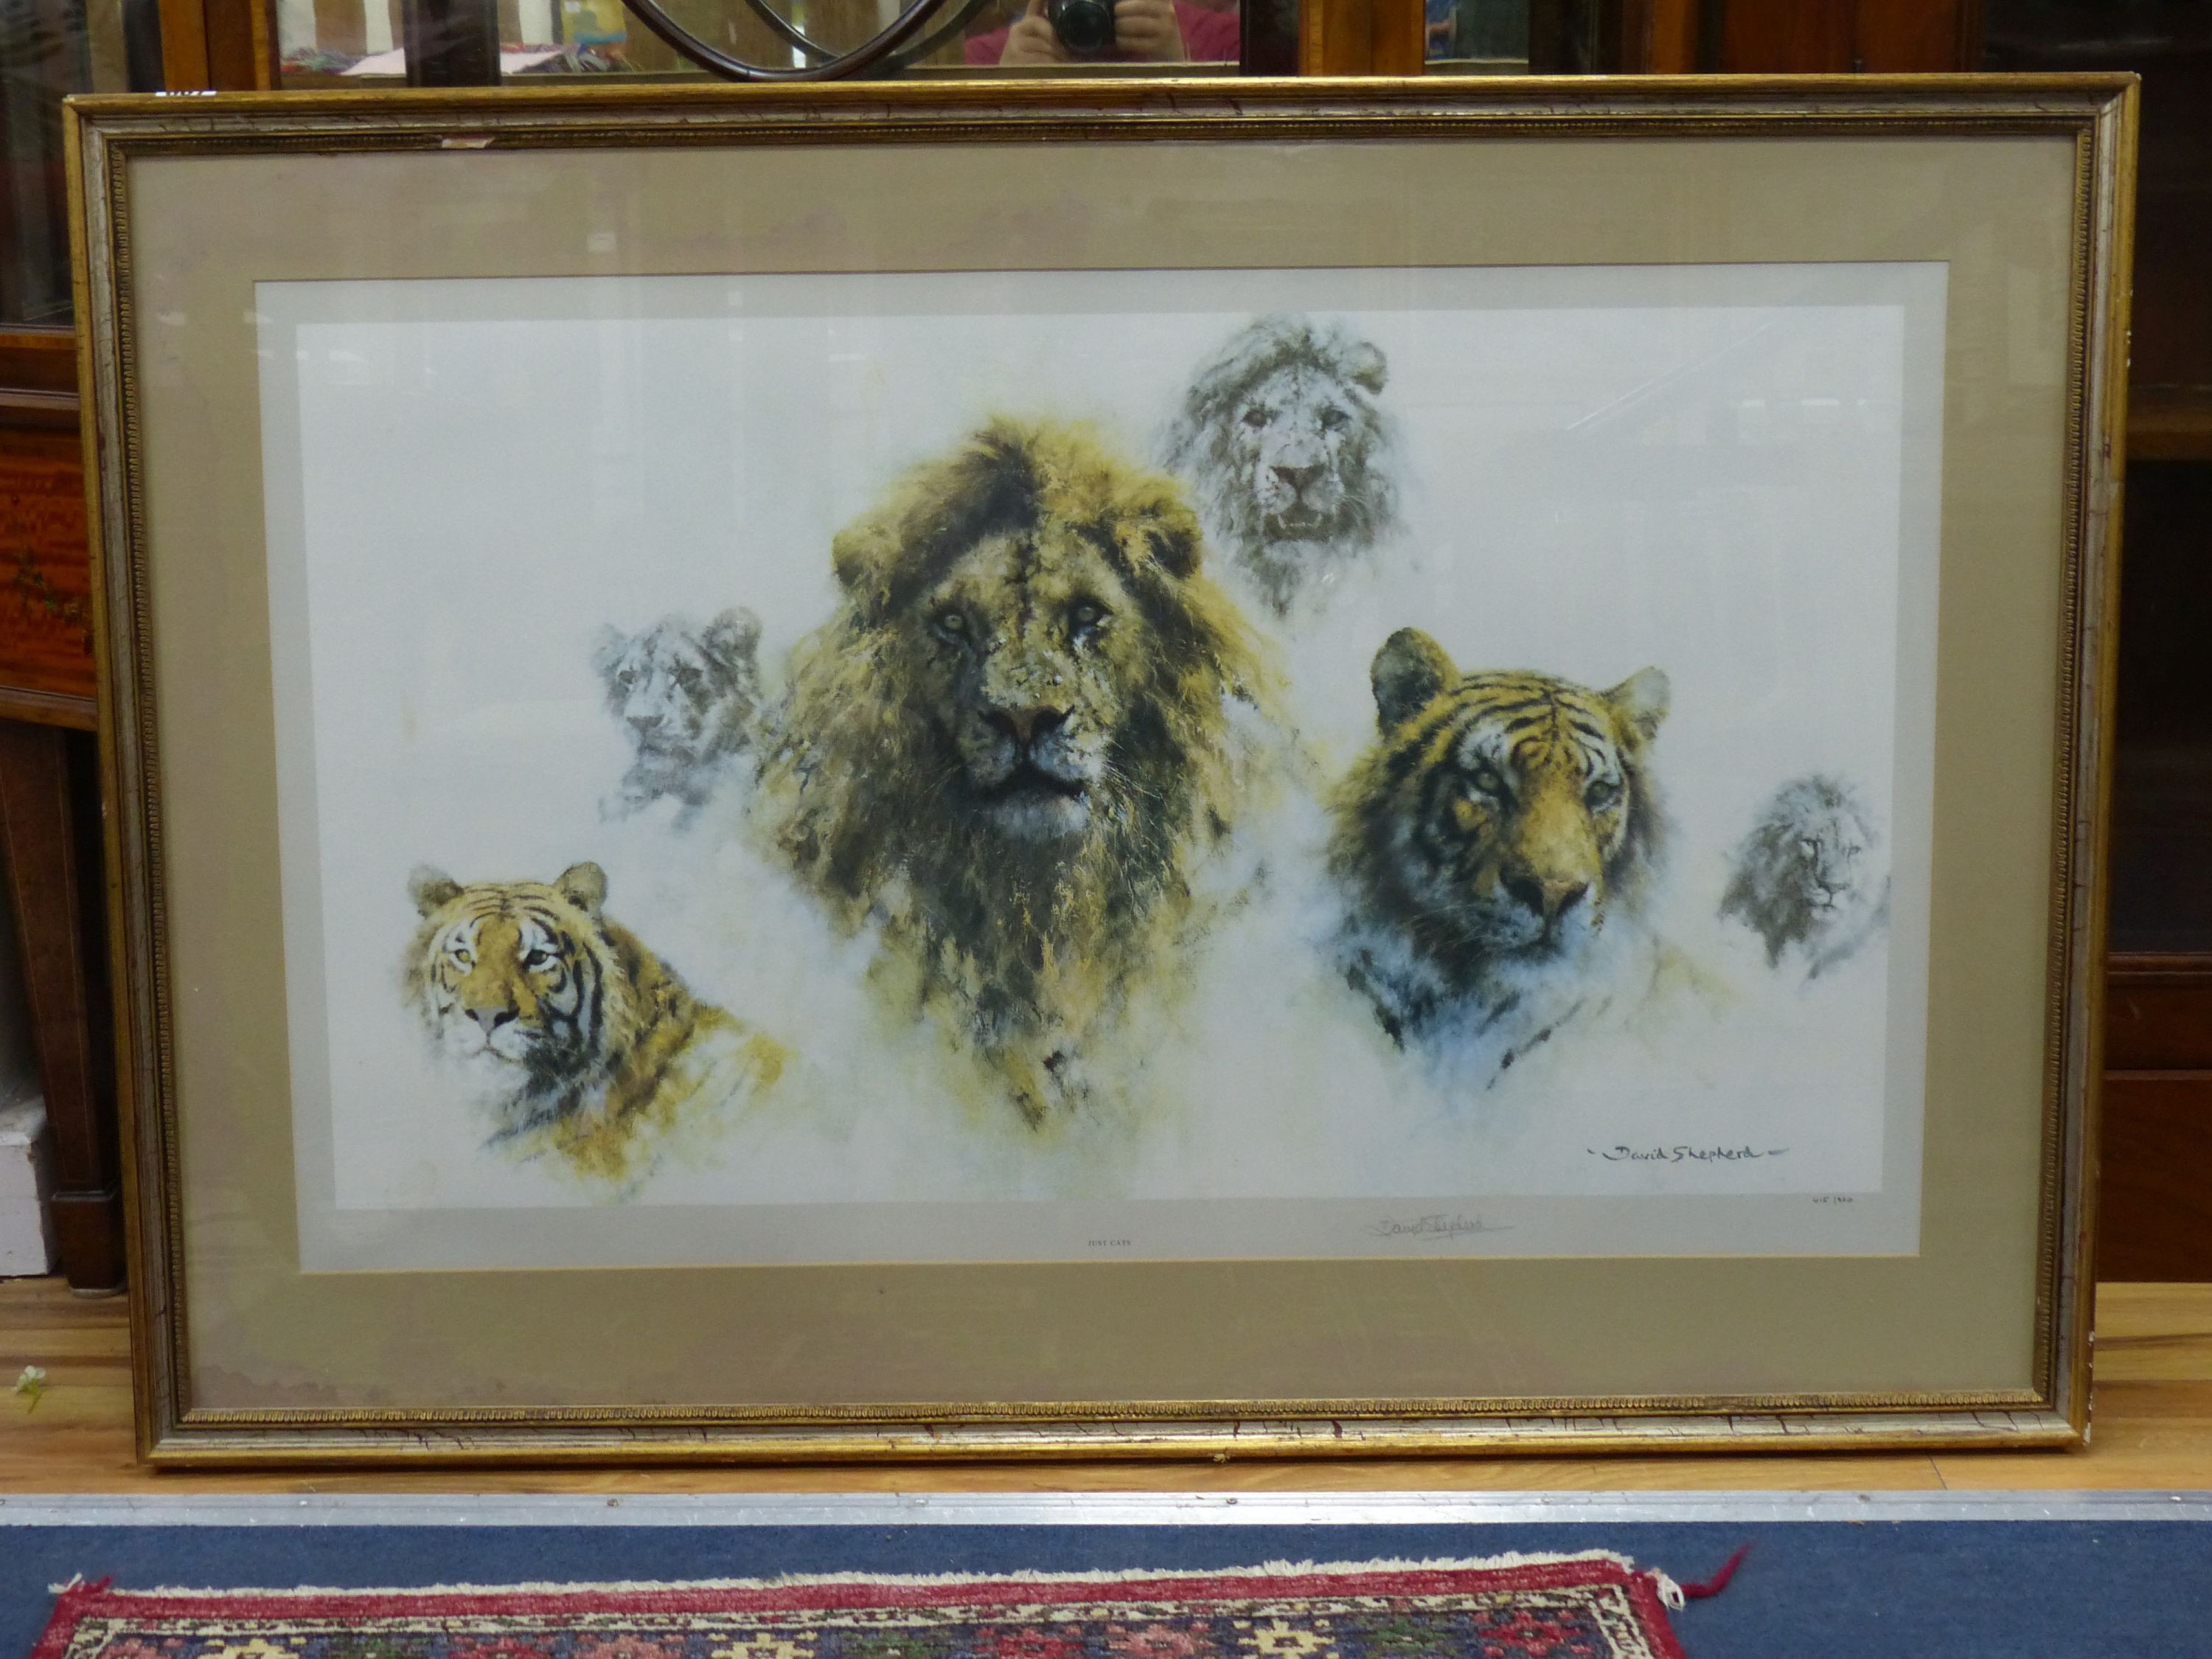 David Shepherd, limited edition print, 'Just Cats', signed in pencil, 615/850, overall 53 x 88cm